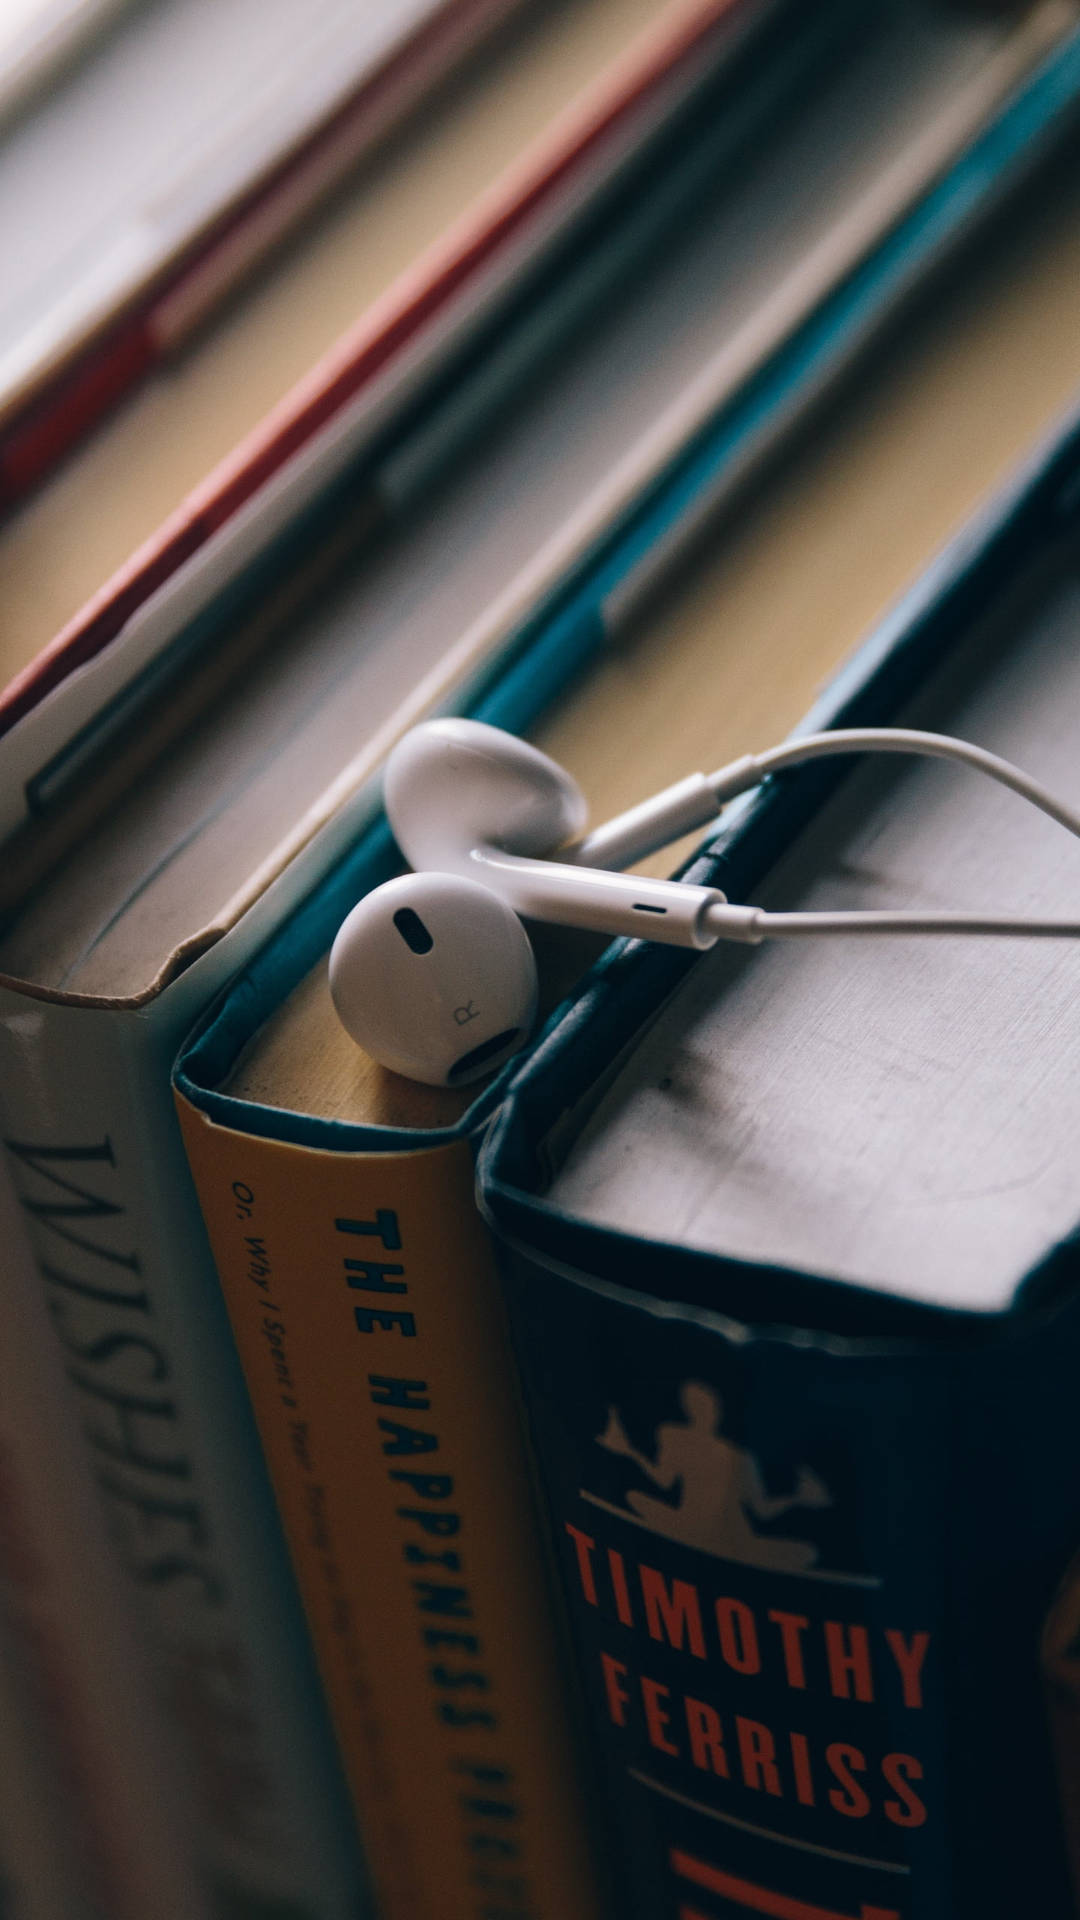 Earphones Placed Over The Books Background